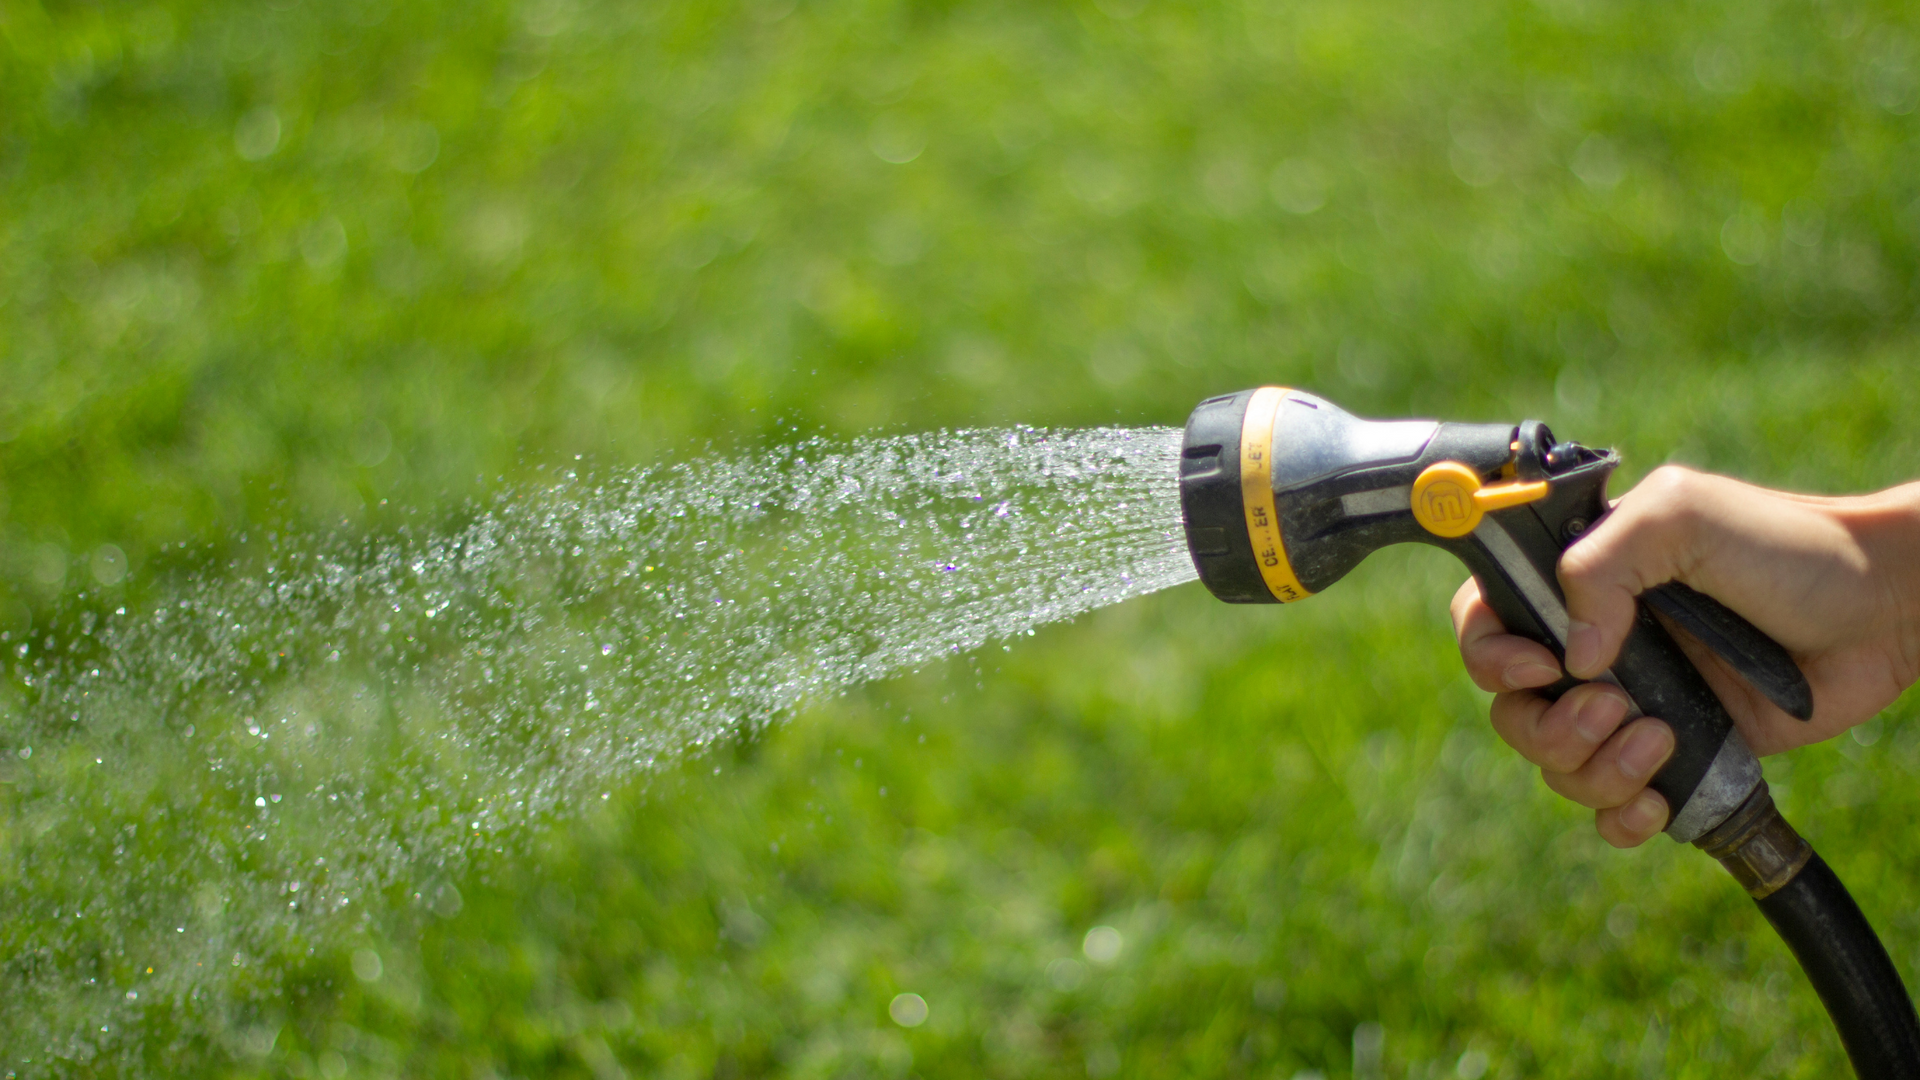 a person watering a lawn with a hose.